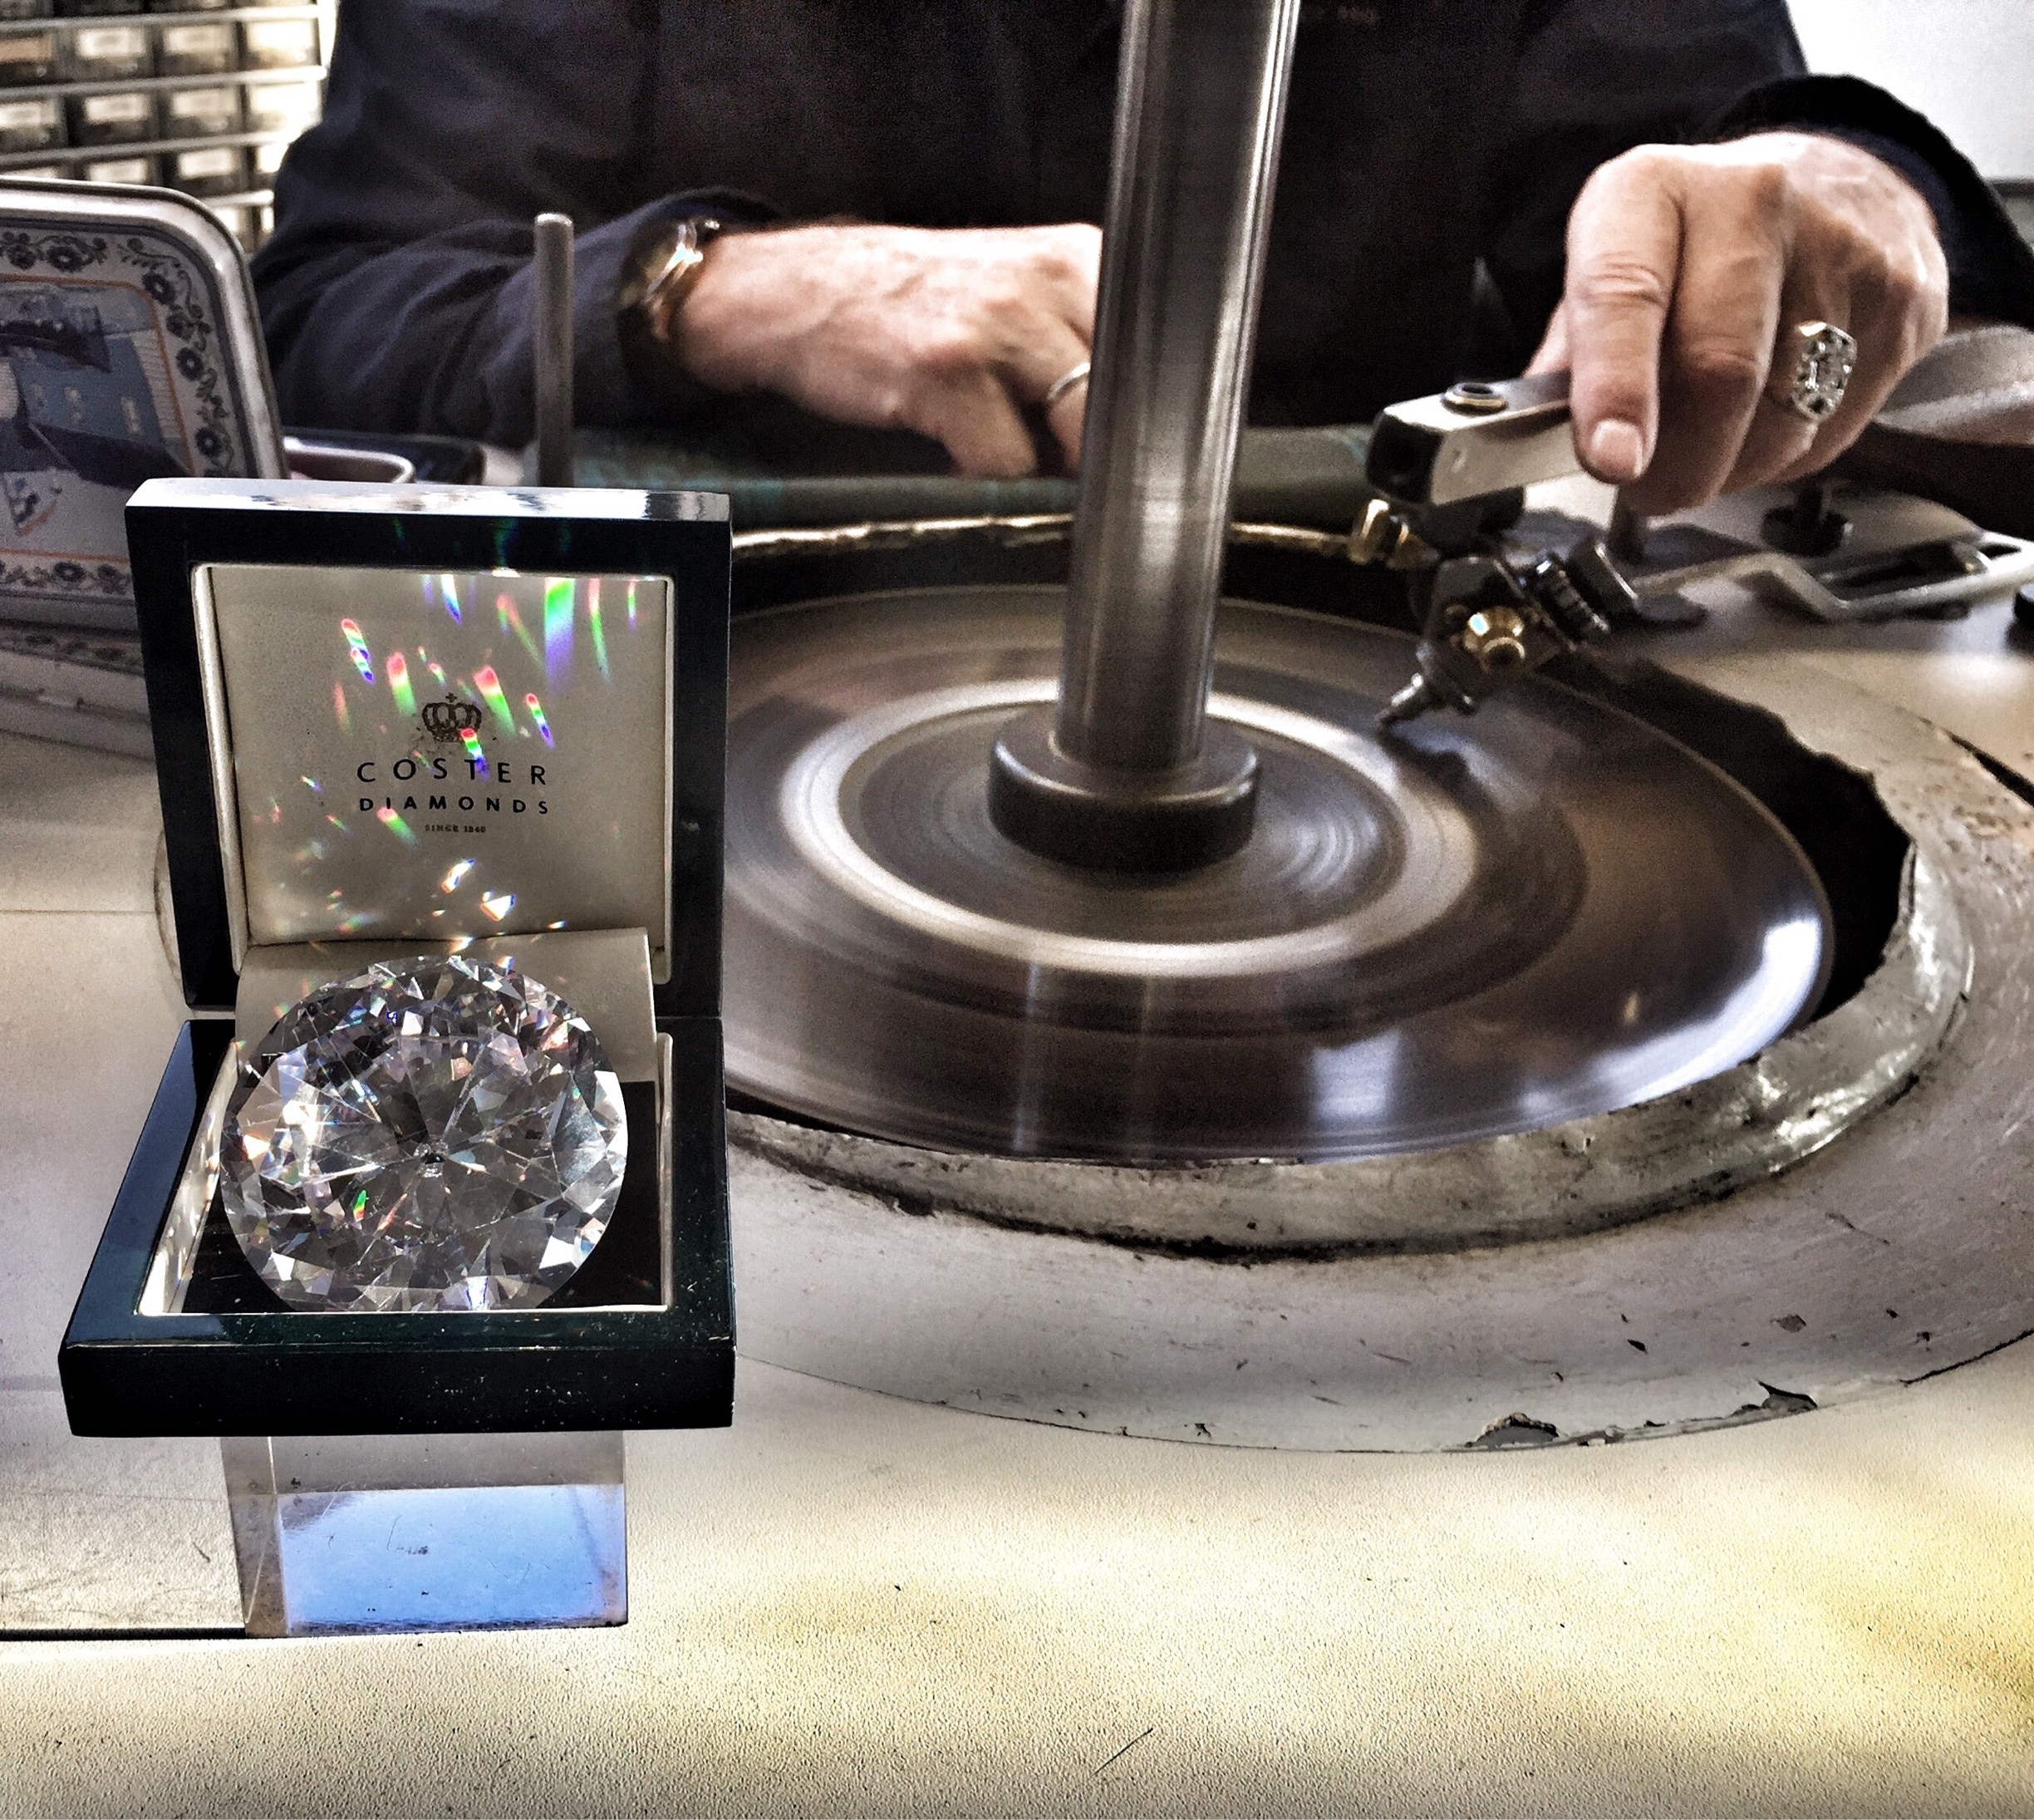 An up-close look at the diamond polishing in Coster Diamonds, Amsterdam💎